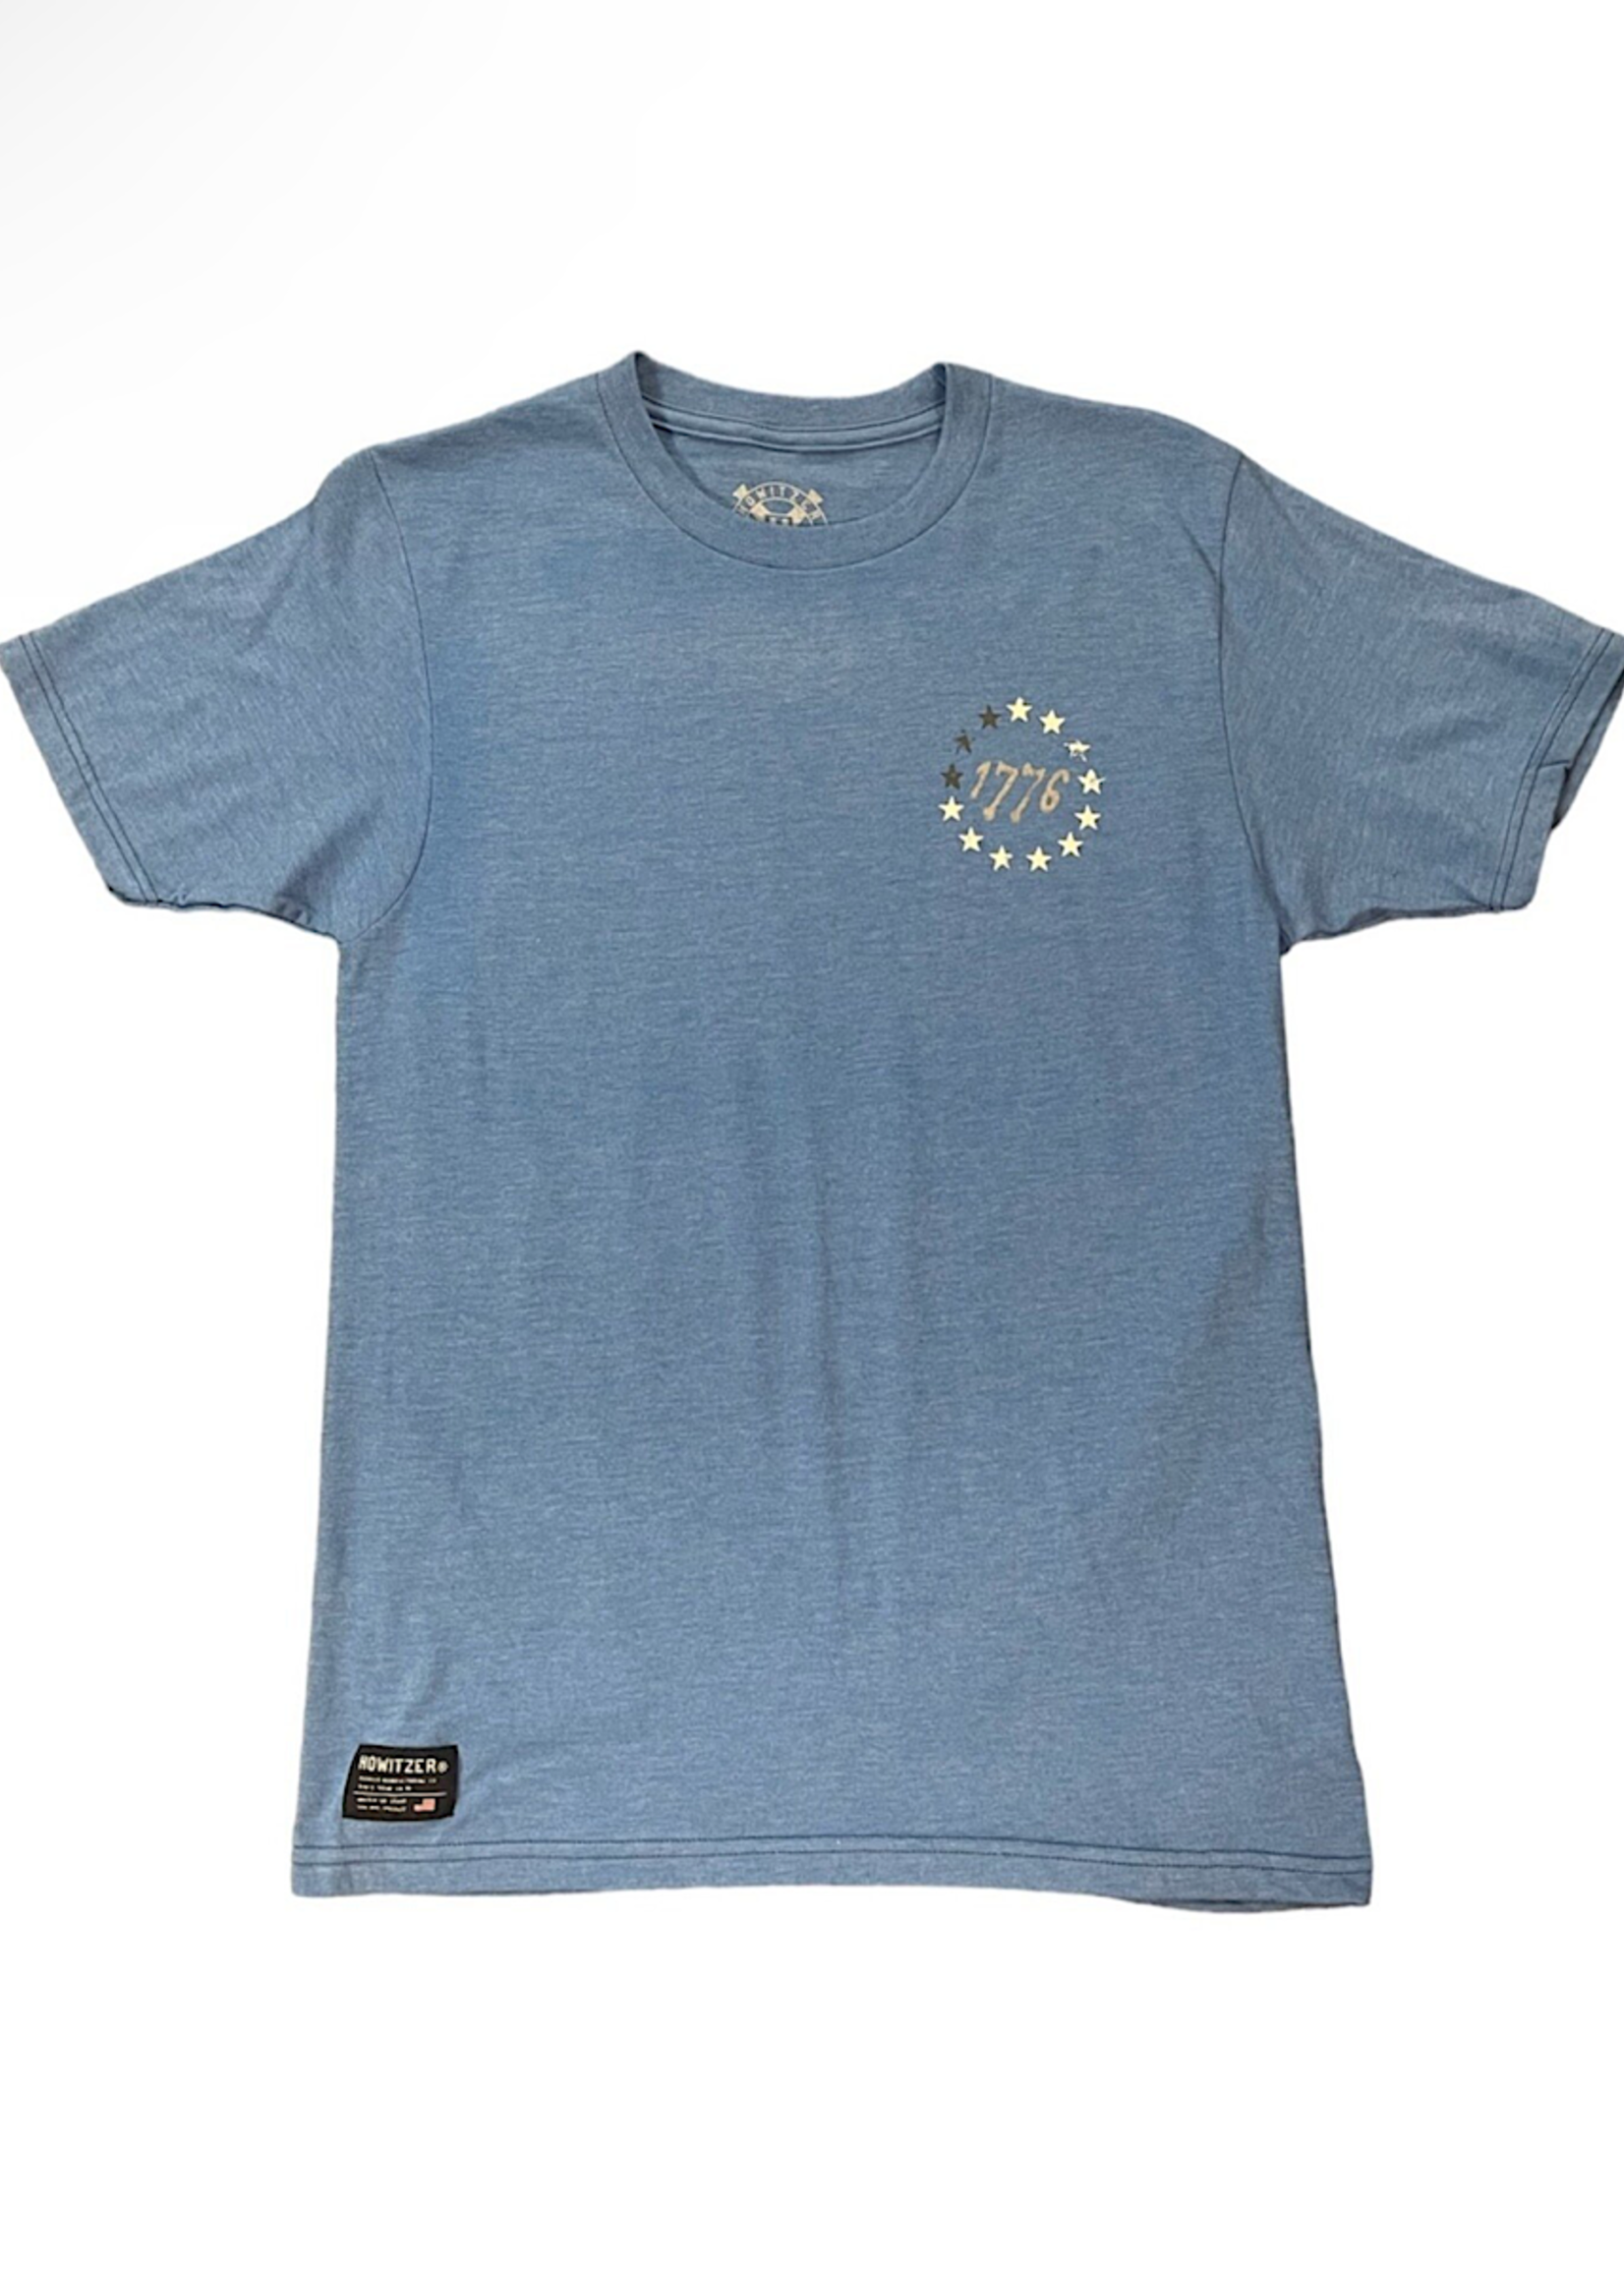 Howitzer Grunge S/S Tee- Electric Blue